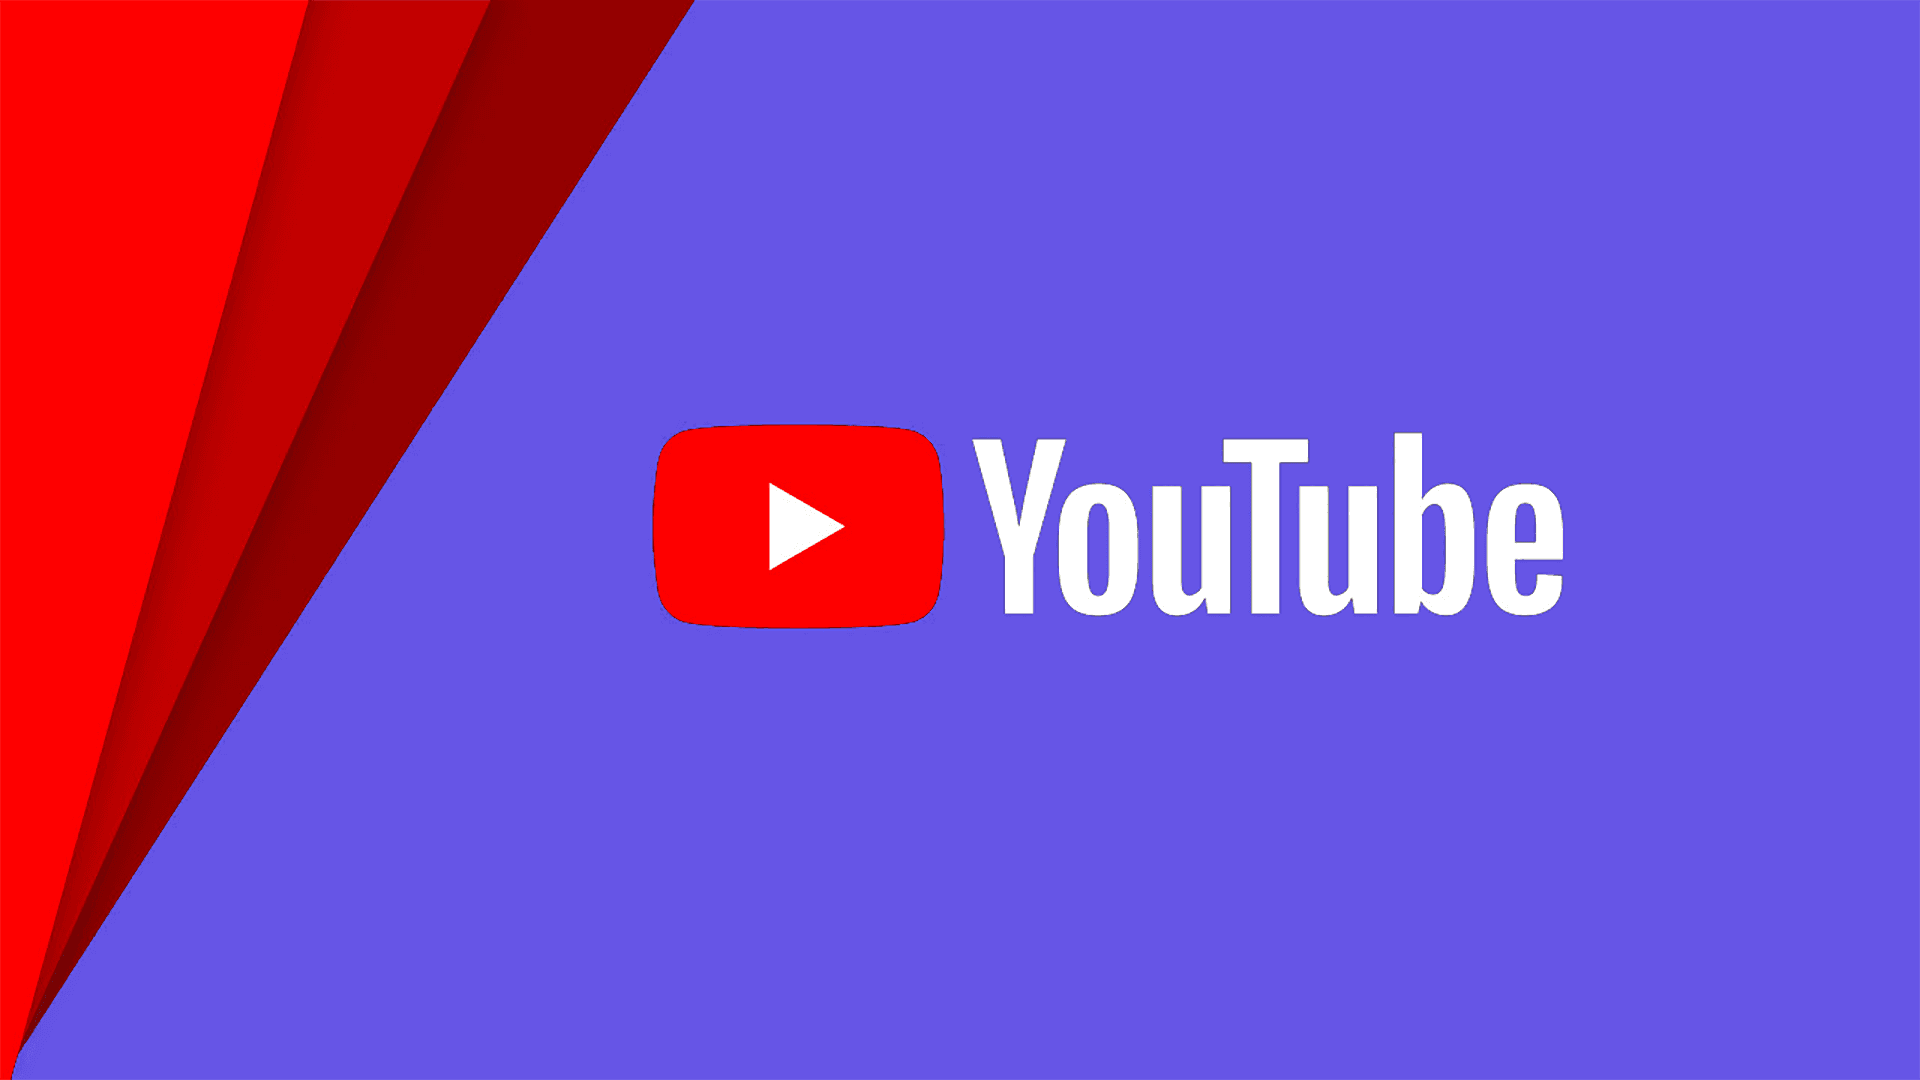 YouTube | An article about the algorithm of YouTube